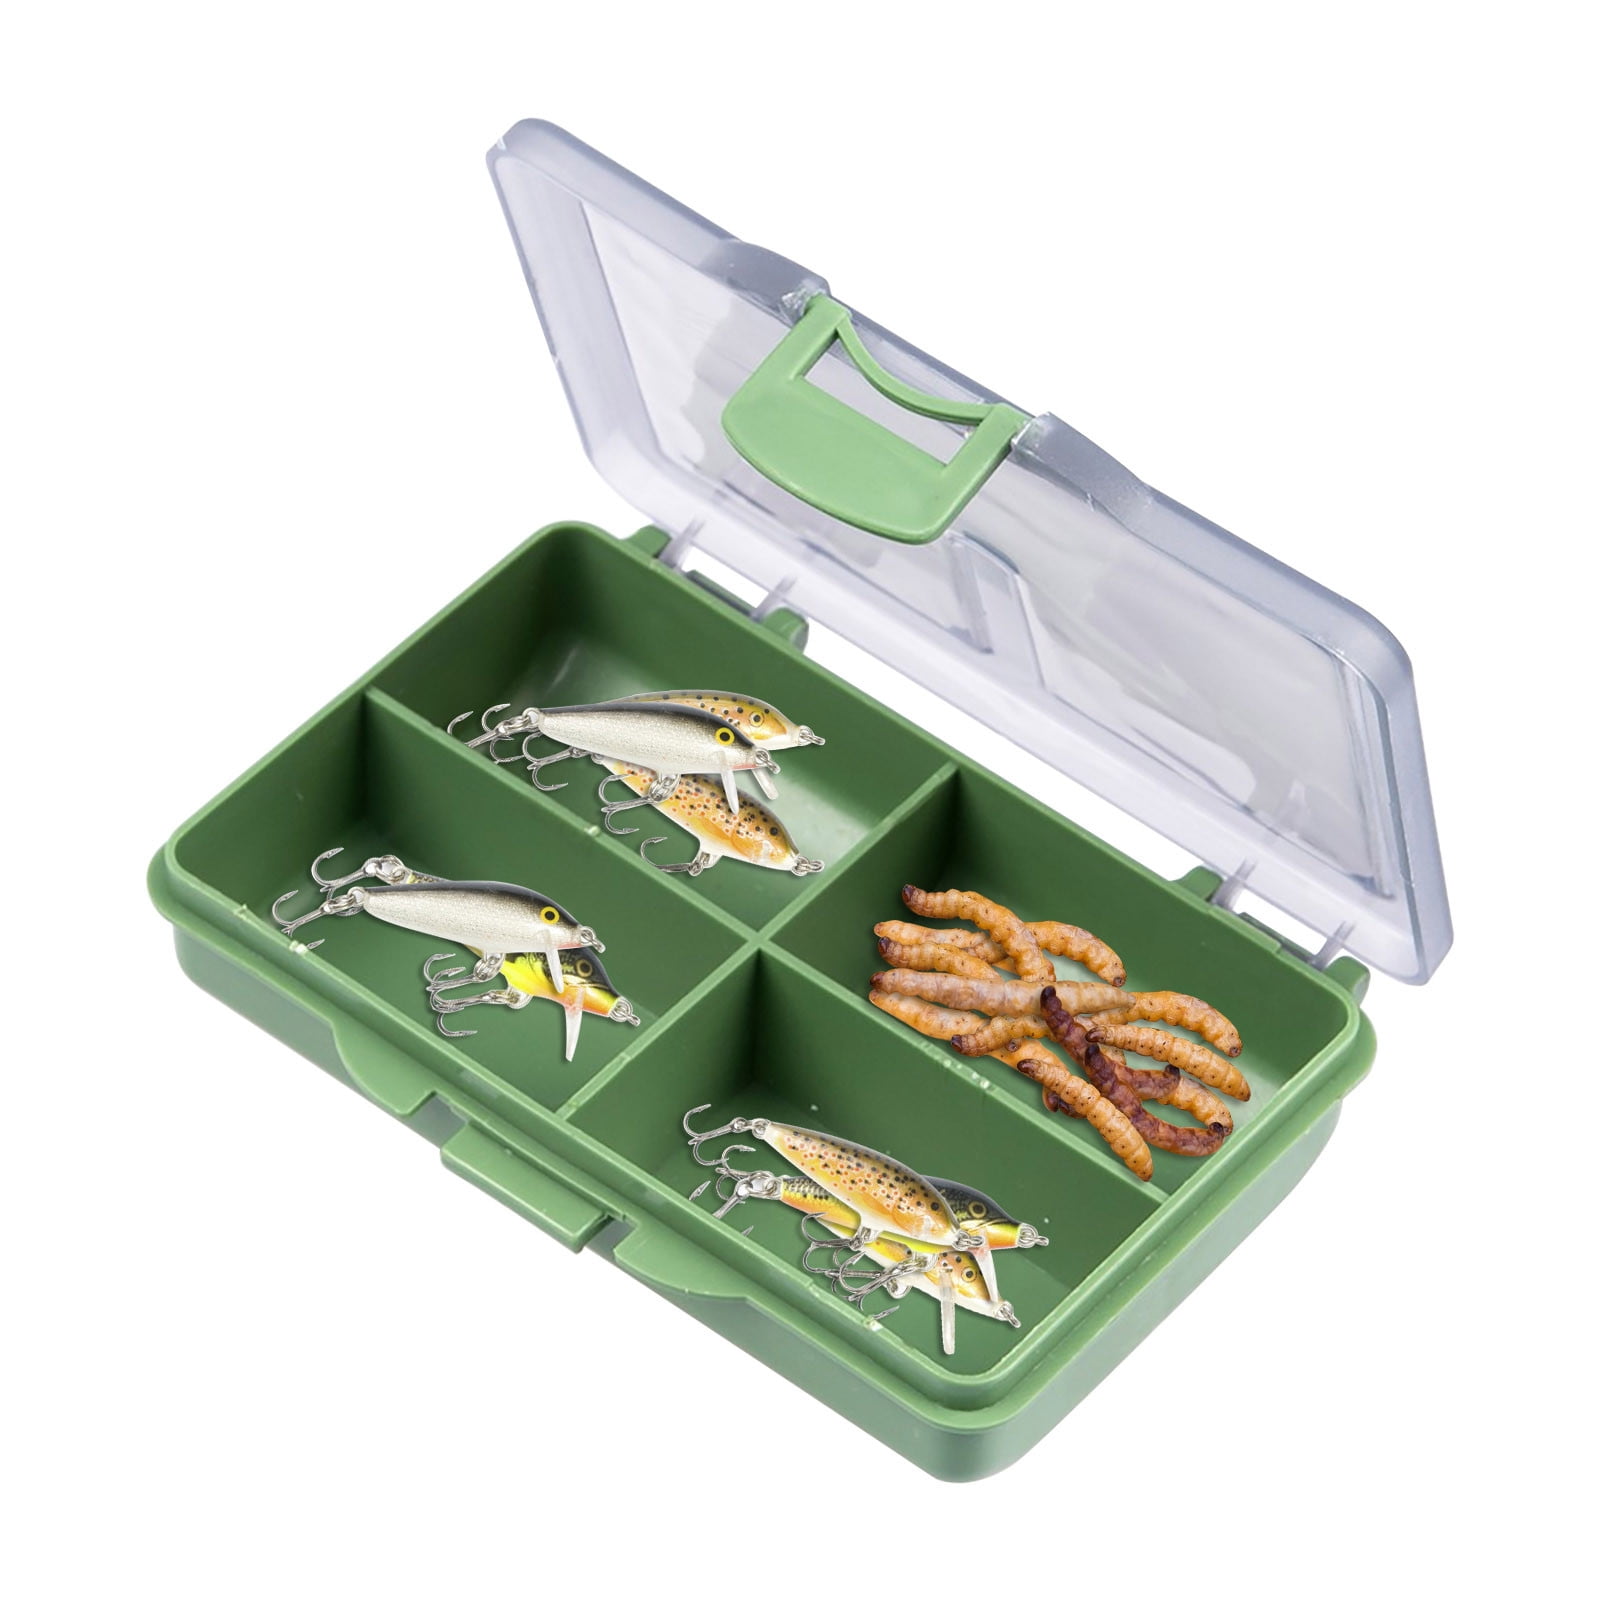 SDJMa Small Clear Visible Plastic Fishing Tackle Accessory Box Fishing Lure  Bait Hooks Storage Box Case Container Organizer Box